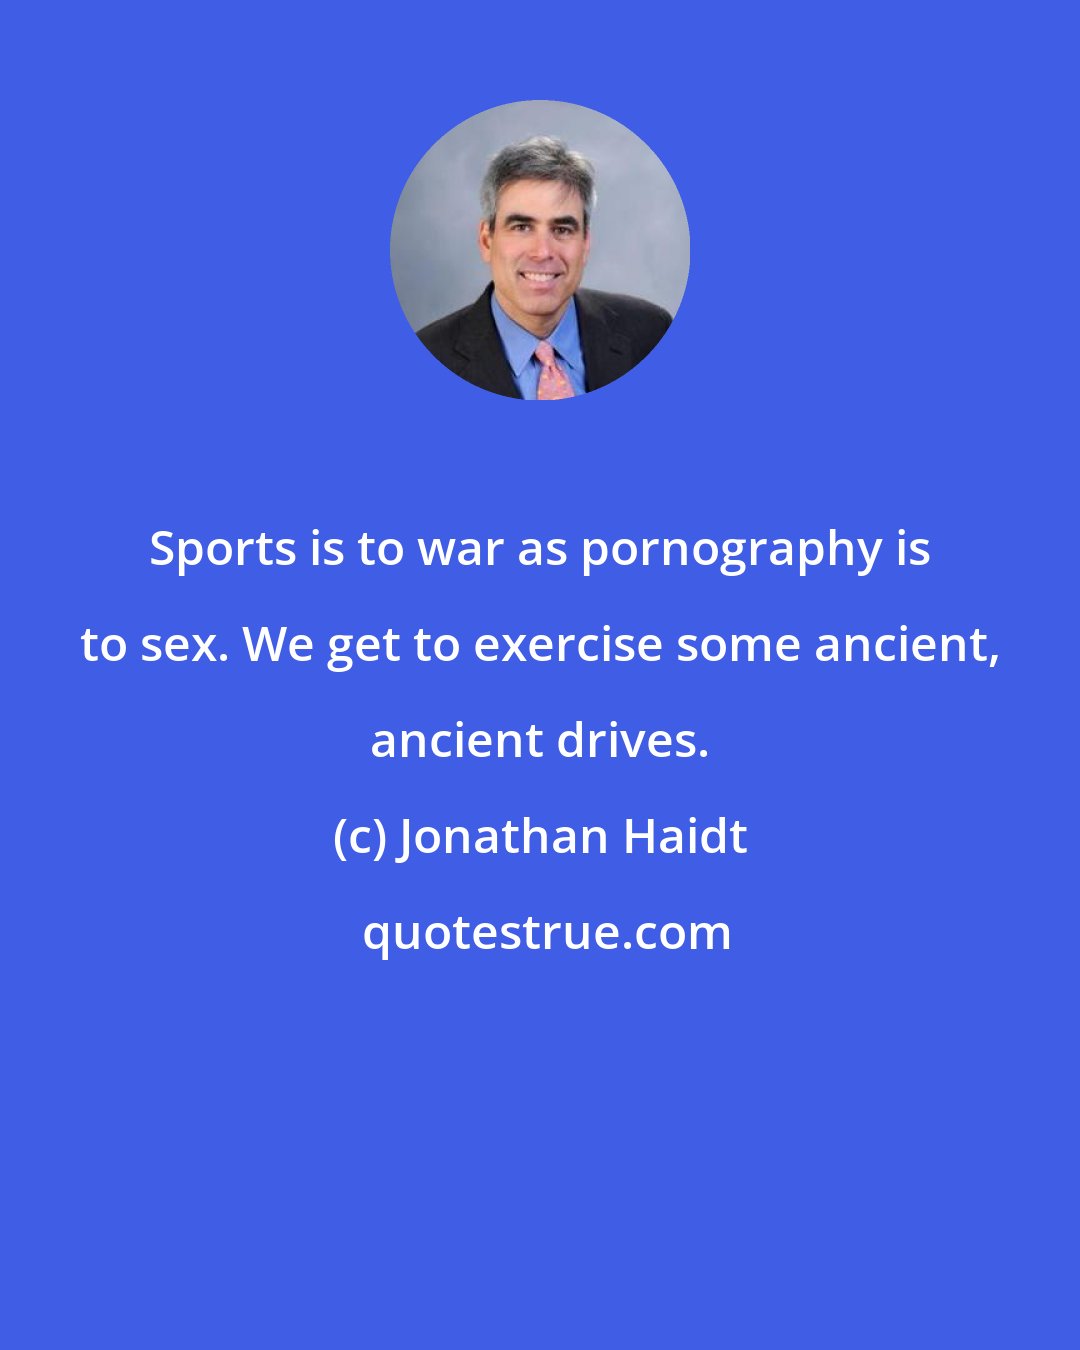 Jonathan Haidt: Sports is to war as pornography is to sex. We get to exercise some ancient, ancient drives.